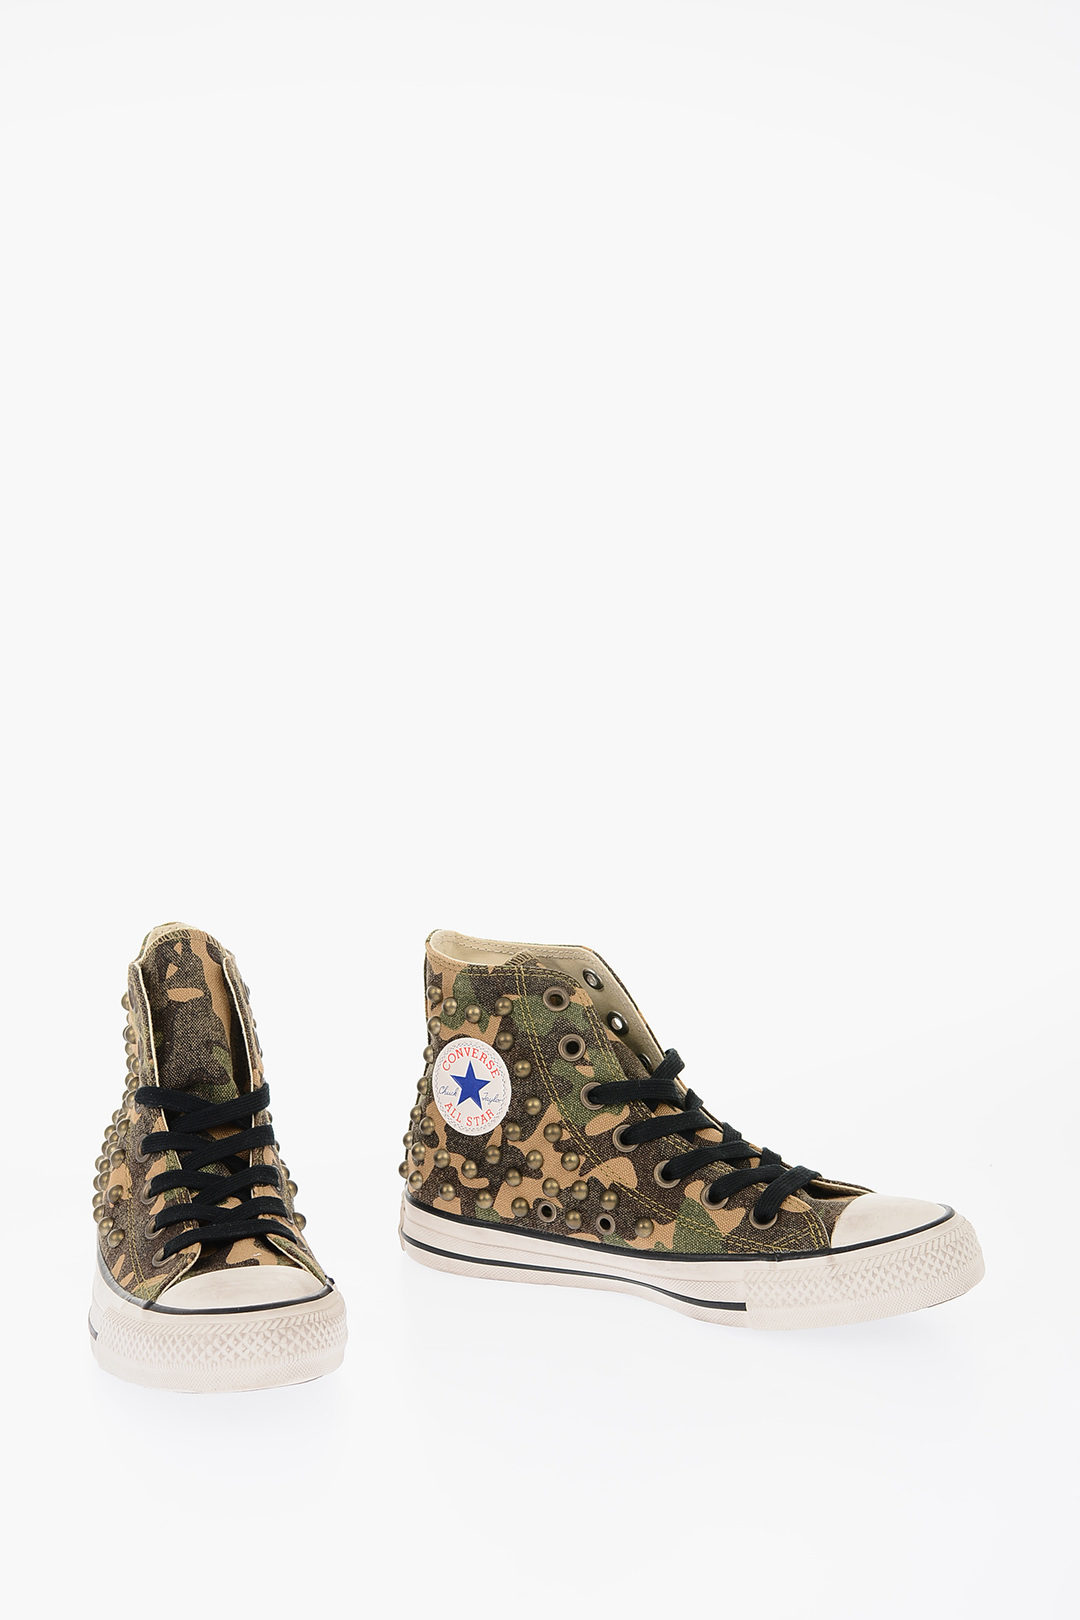 Converse Jack Purcell LTT - Olive Branch Camo | Complex